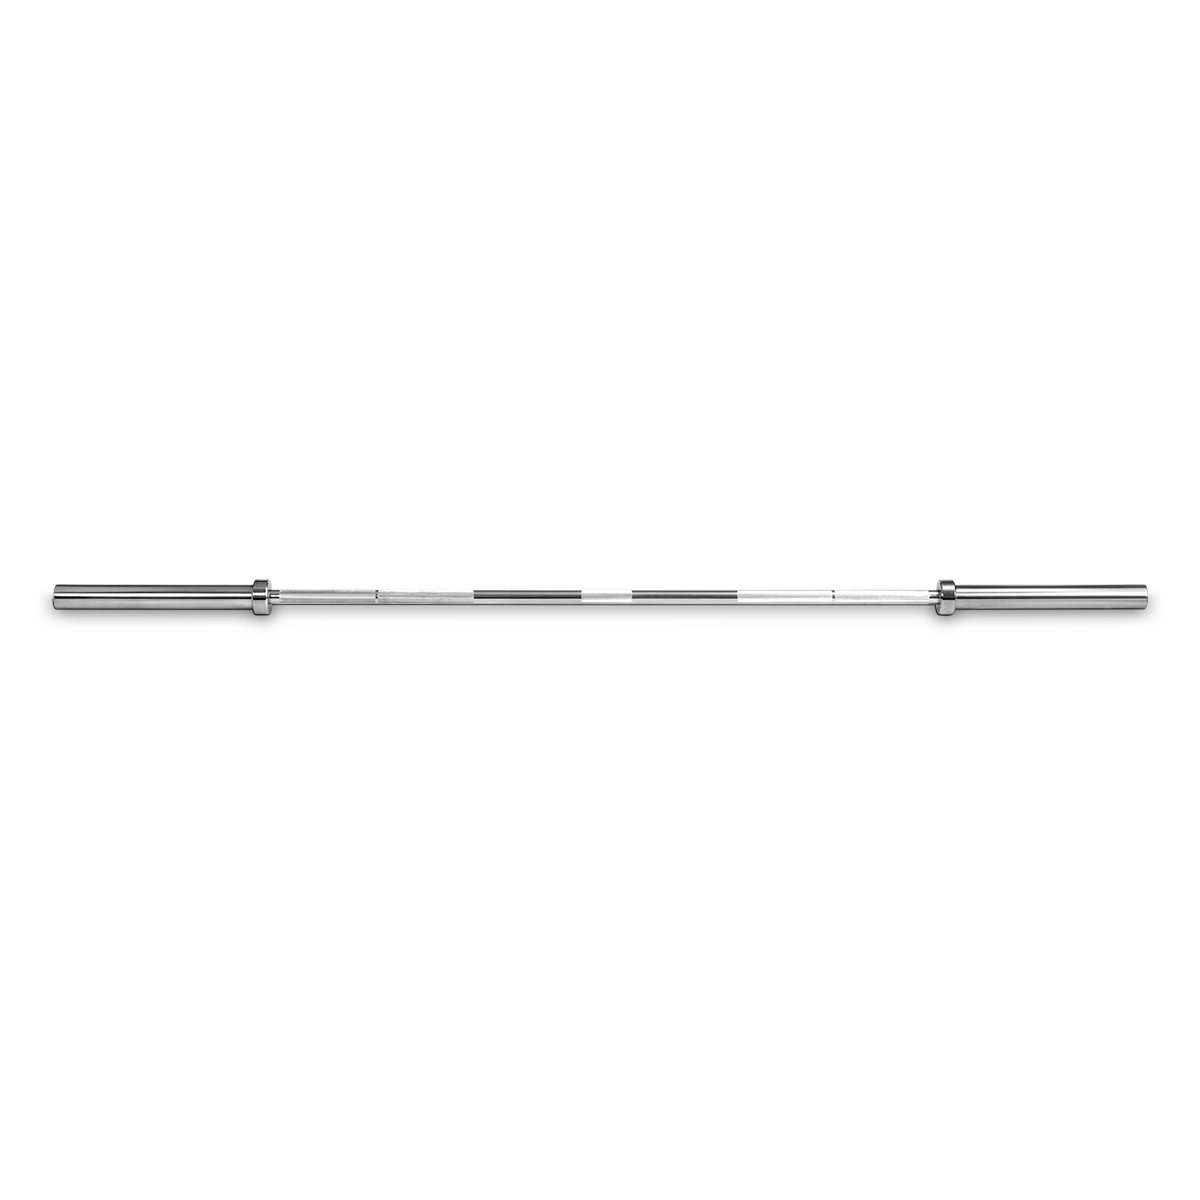 Topbuy 700 lbs Olympic Chromed Bar Multipurpose Straight Weight Lifting Bar 7-Foot